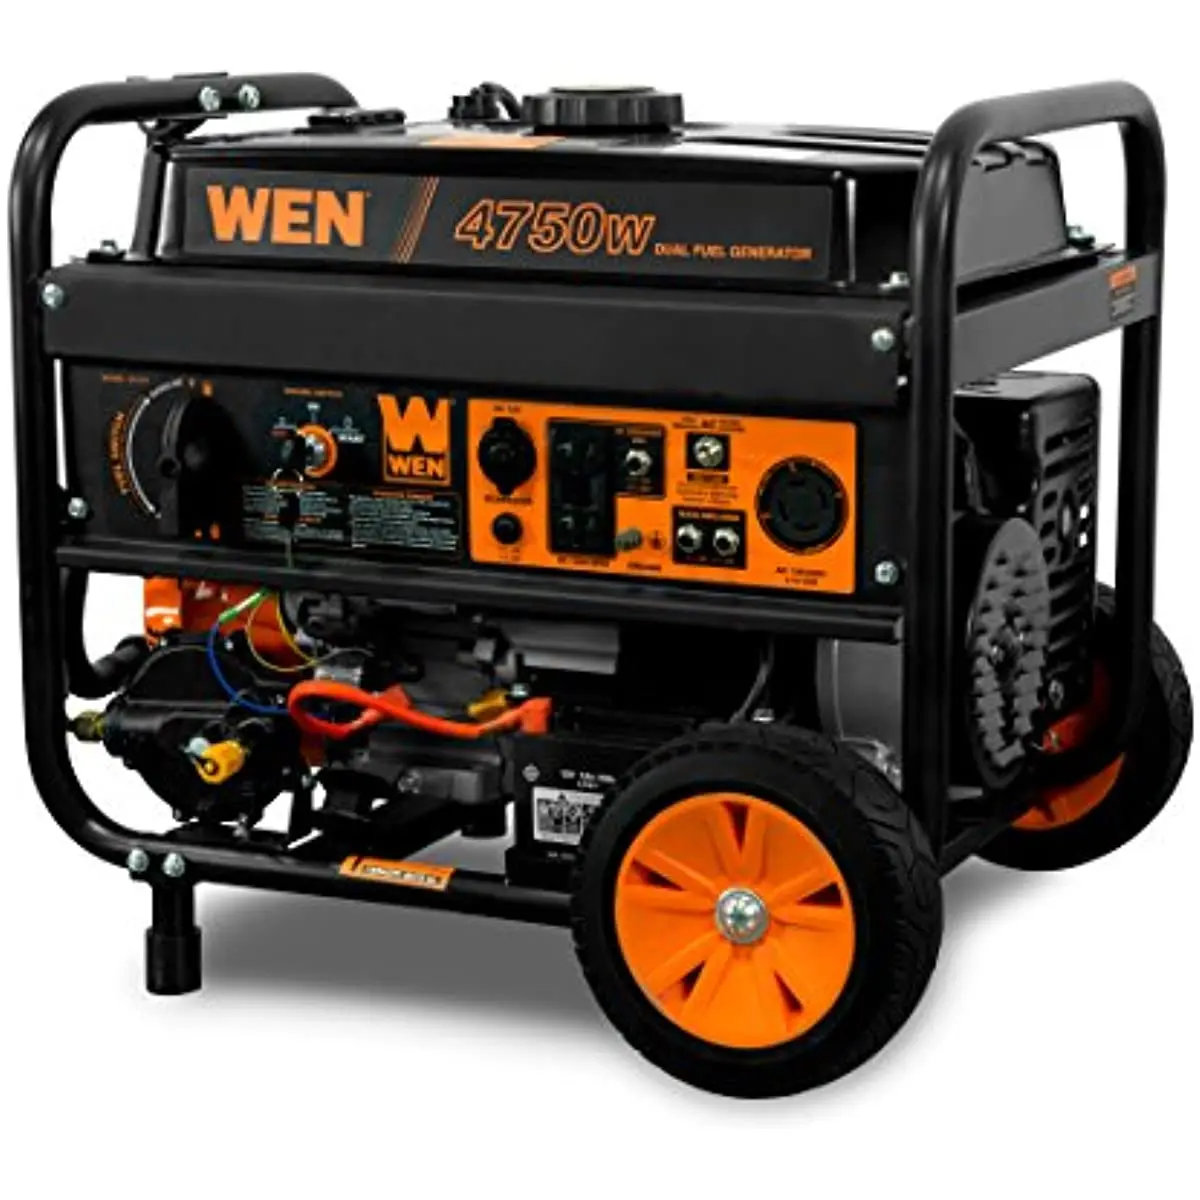 

WEN DF475T Dual Fuel 120V/240V Portable Generator with Electric Start Transfer Switch Ready, 4750-Watt, CARB Compliant